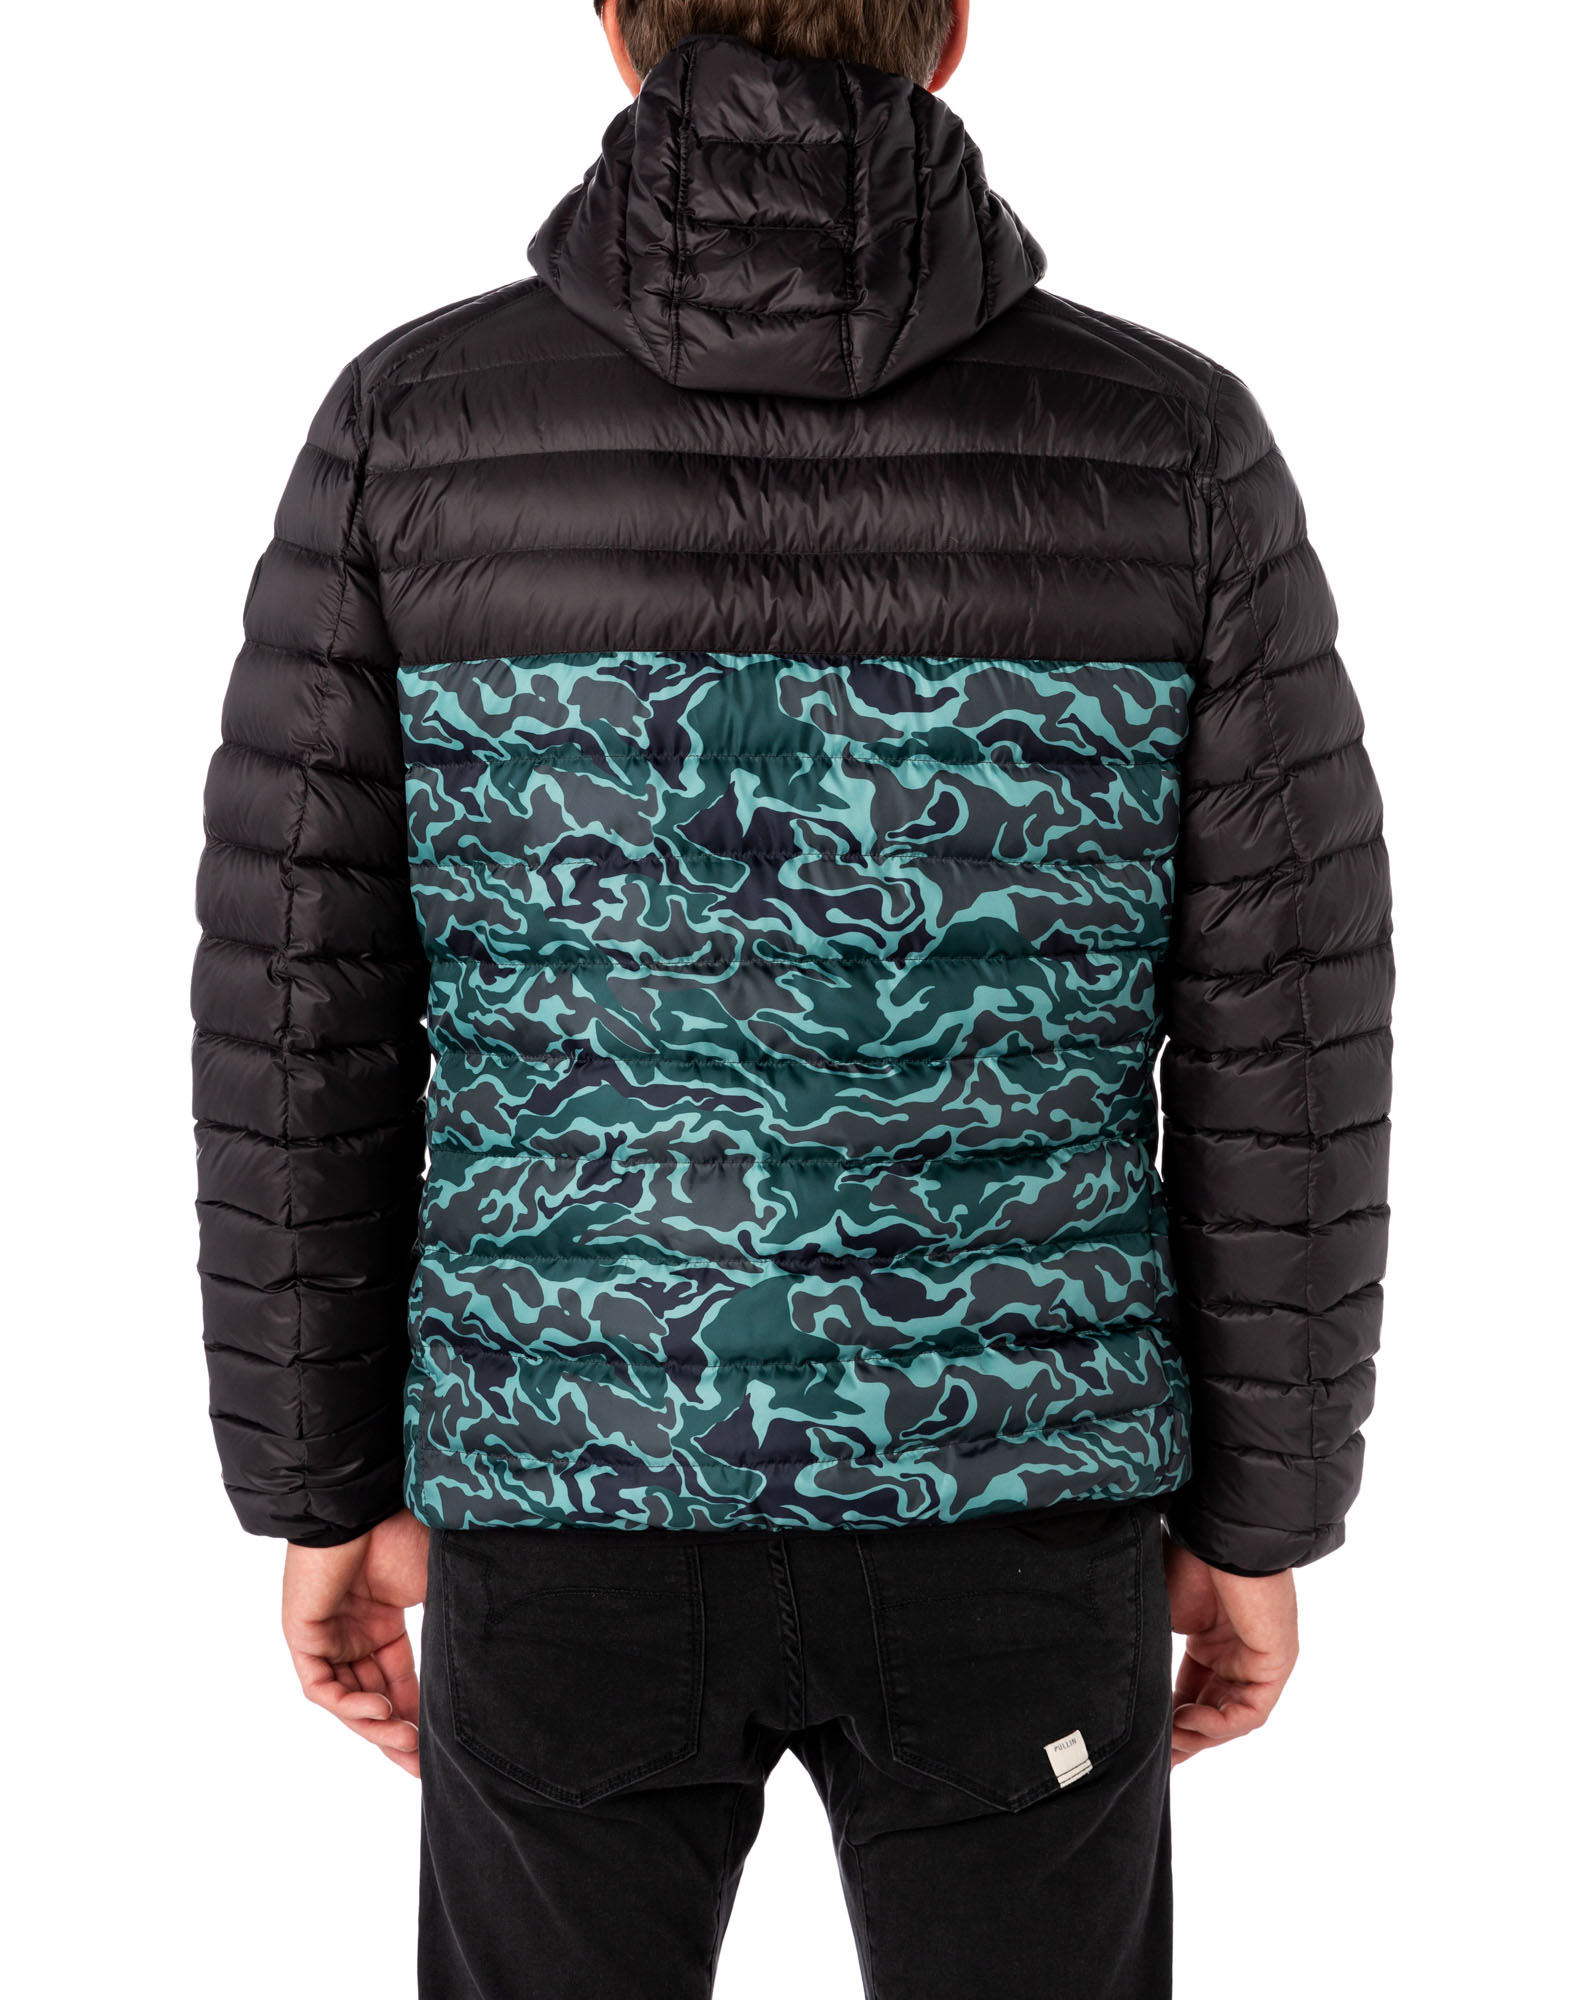 Men's feather jacket with hood CAMO